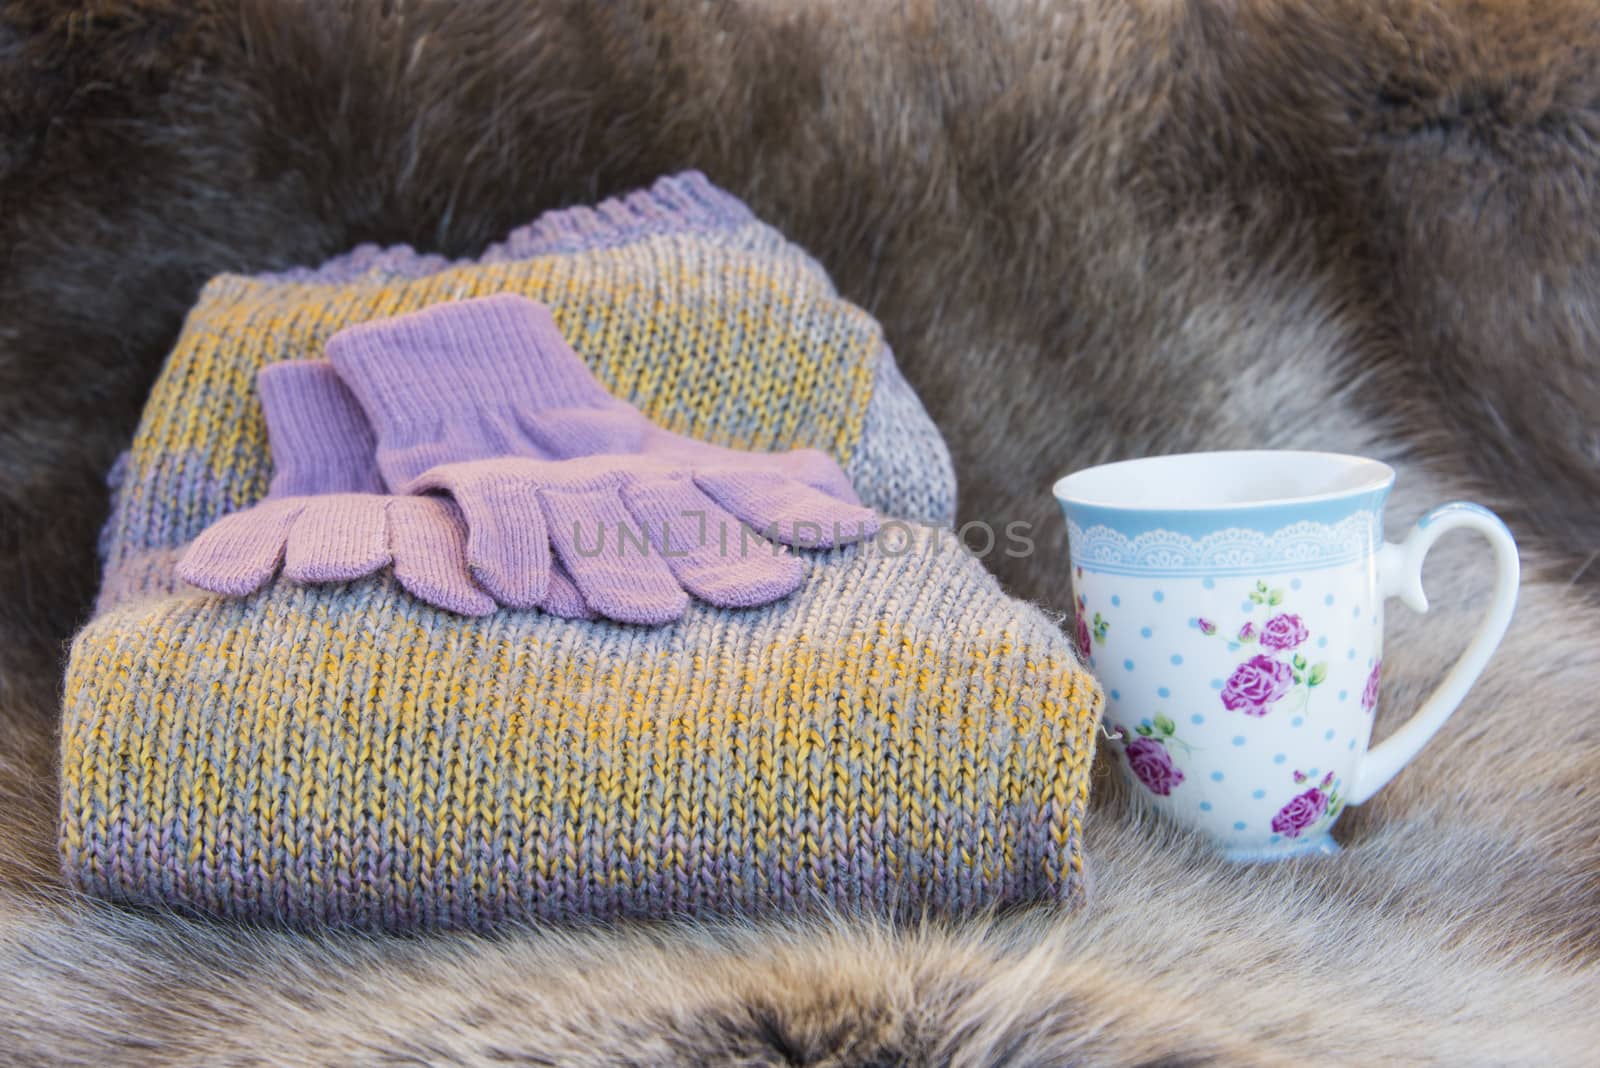 Keeping warm in autumn and winter with a wool sweater, gloves and a cup of hot drink.  Lying on reindeer fur